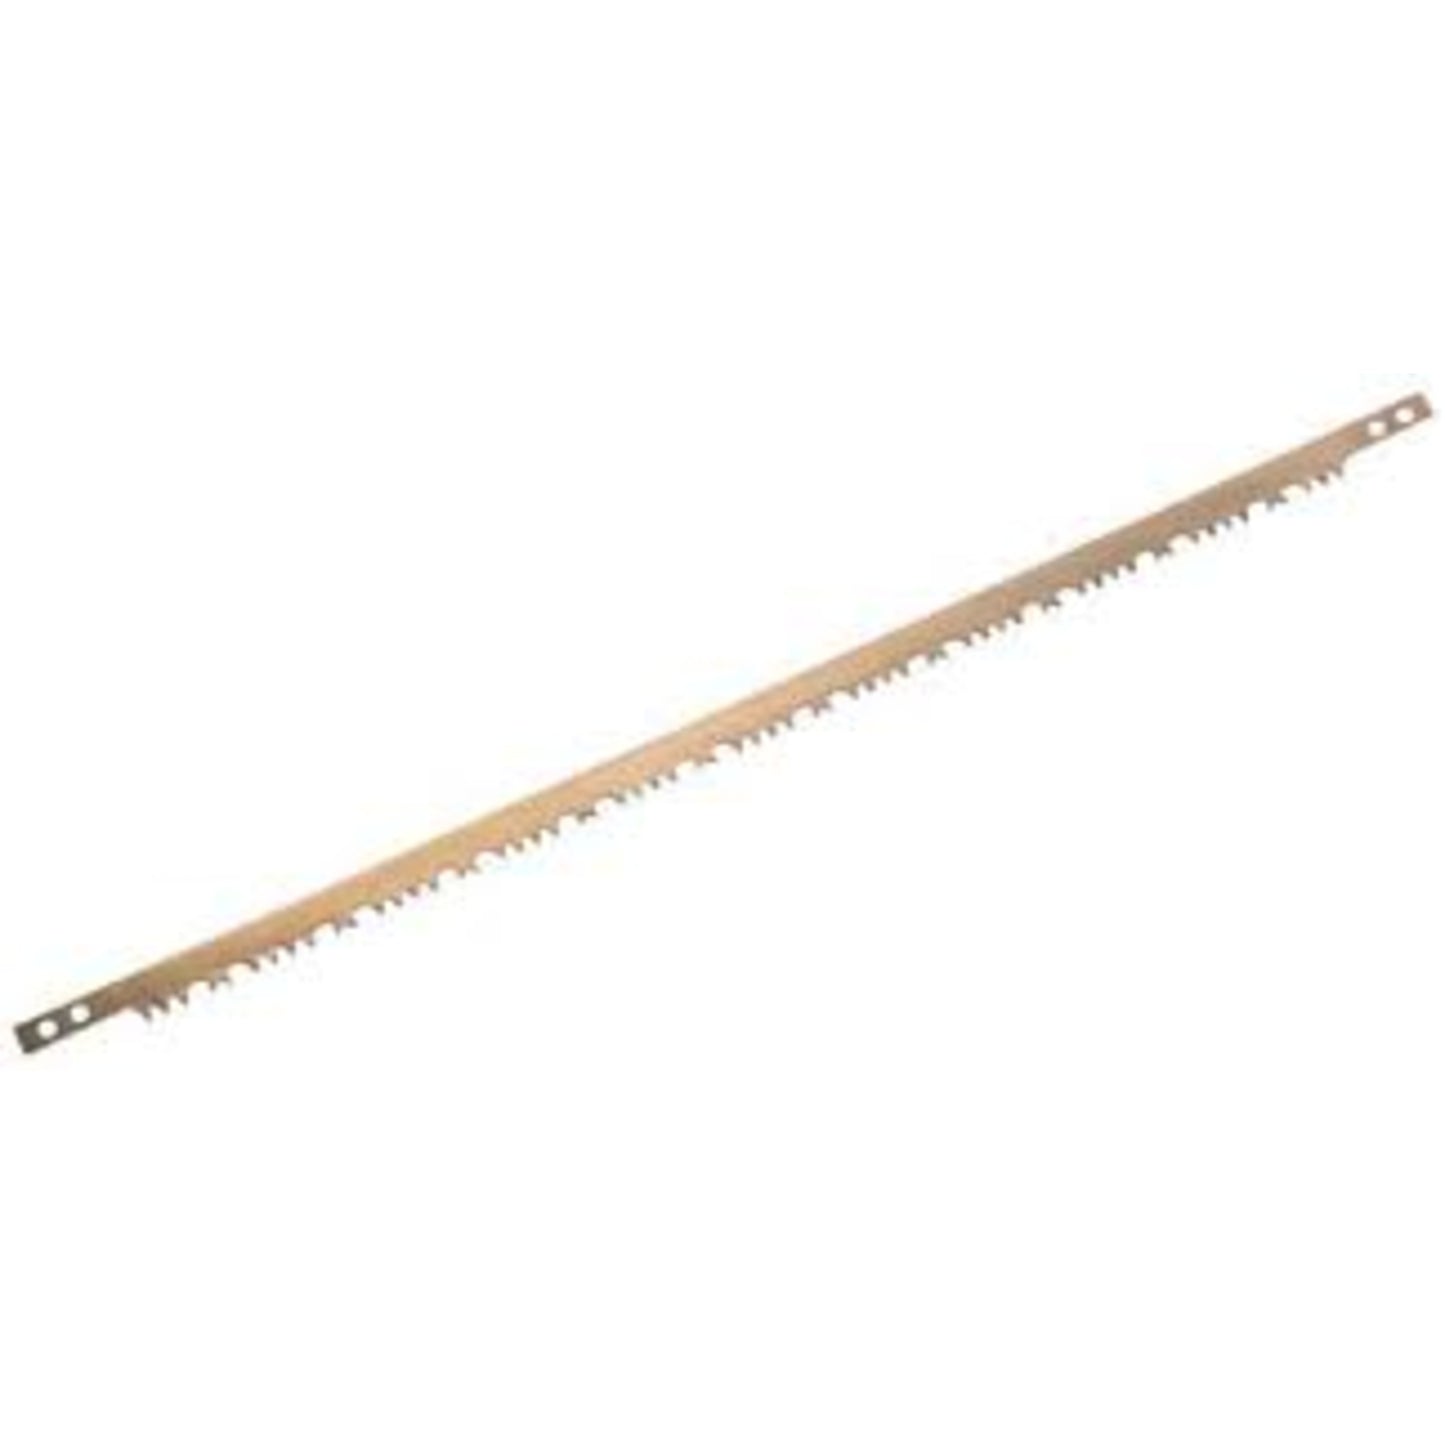 Bahco 23-30, 30" Bow Saw Replacement Blade For Green Wood